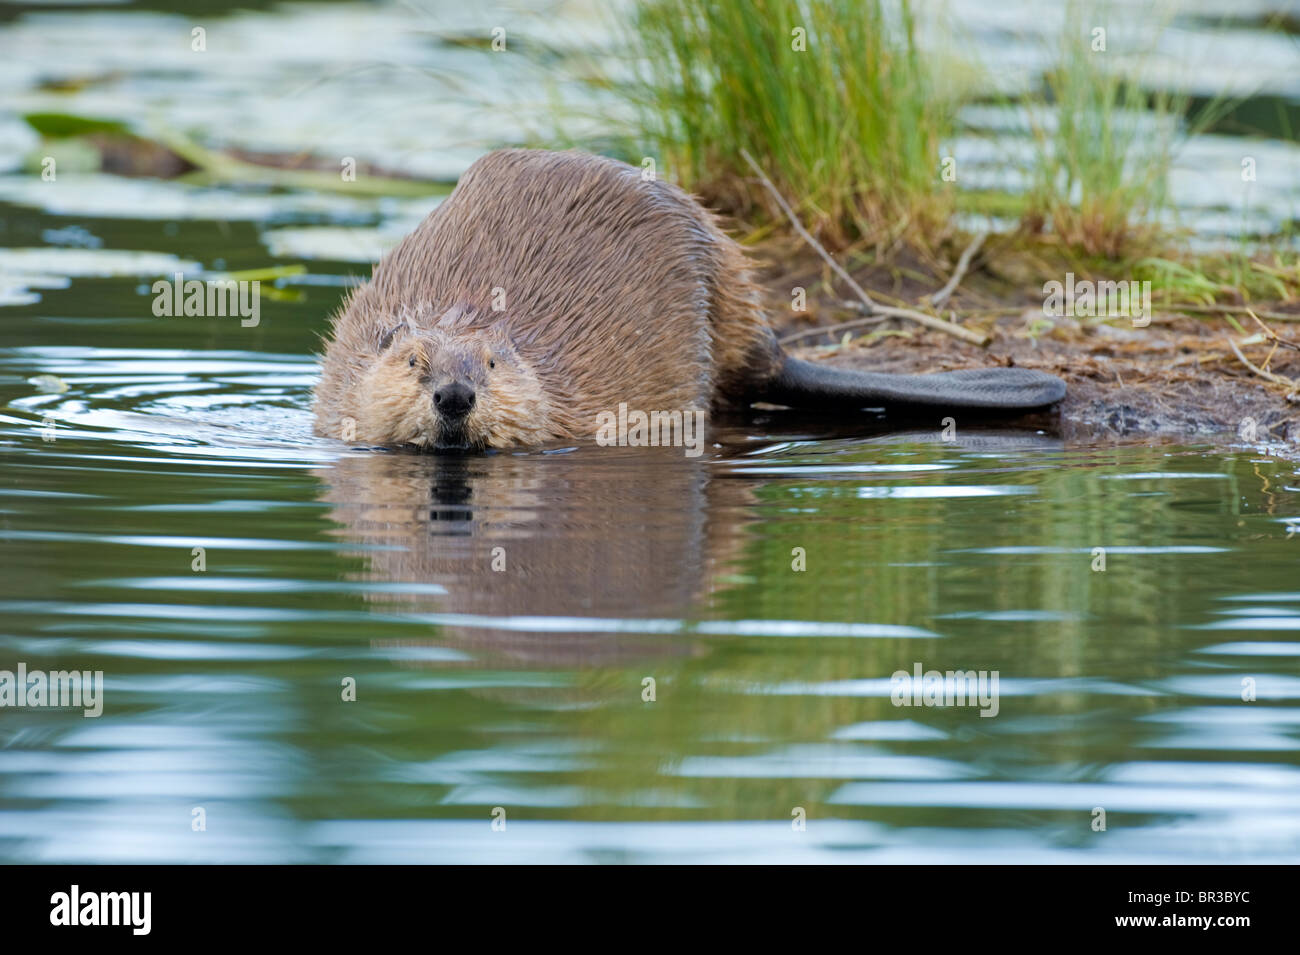 A wild Canadian beaver entering the water from a spit of land in a marshy habitat. Stock Photo